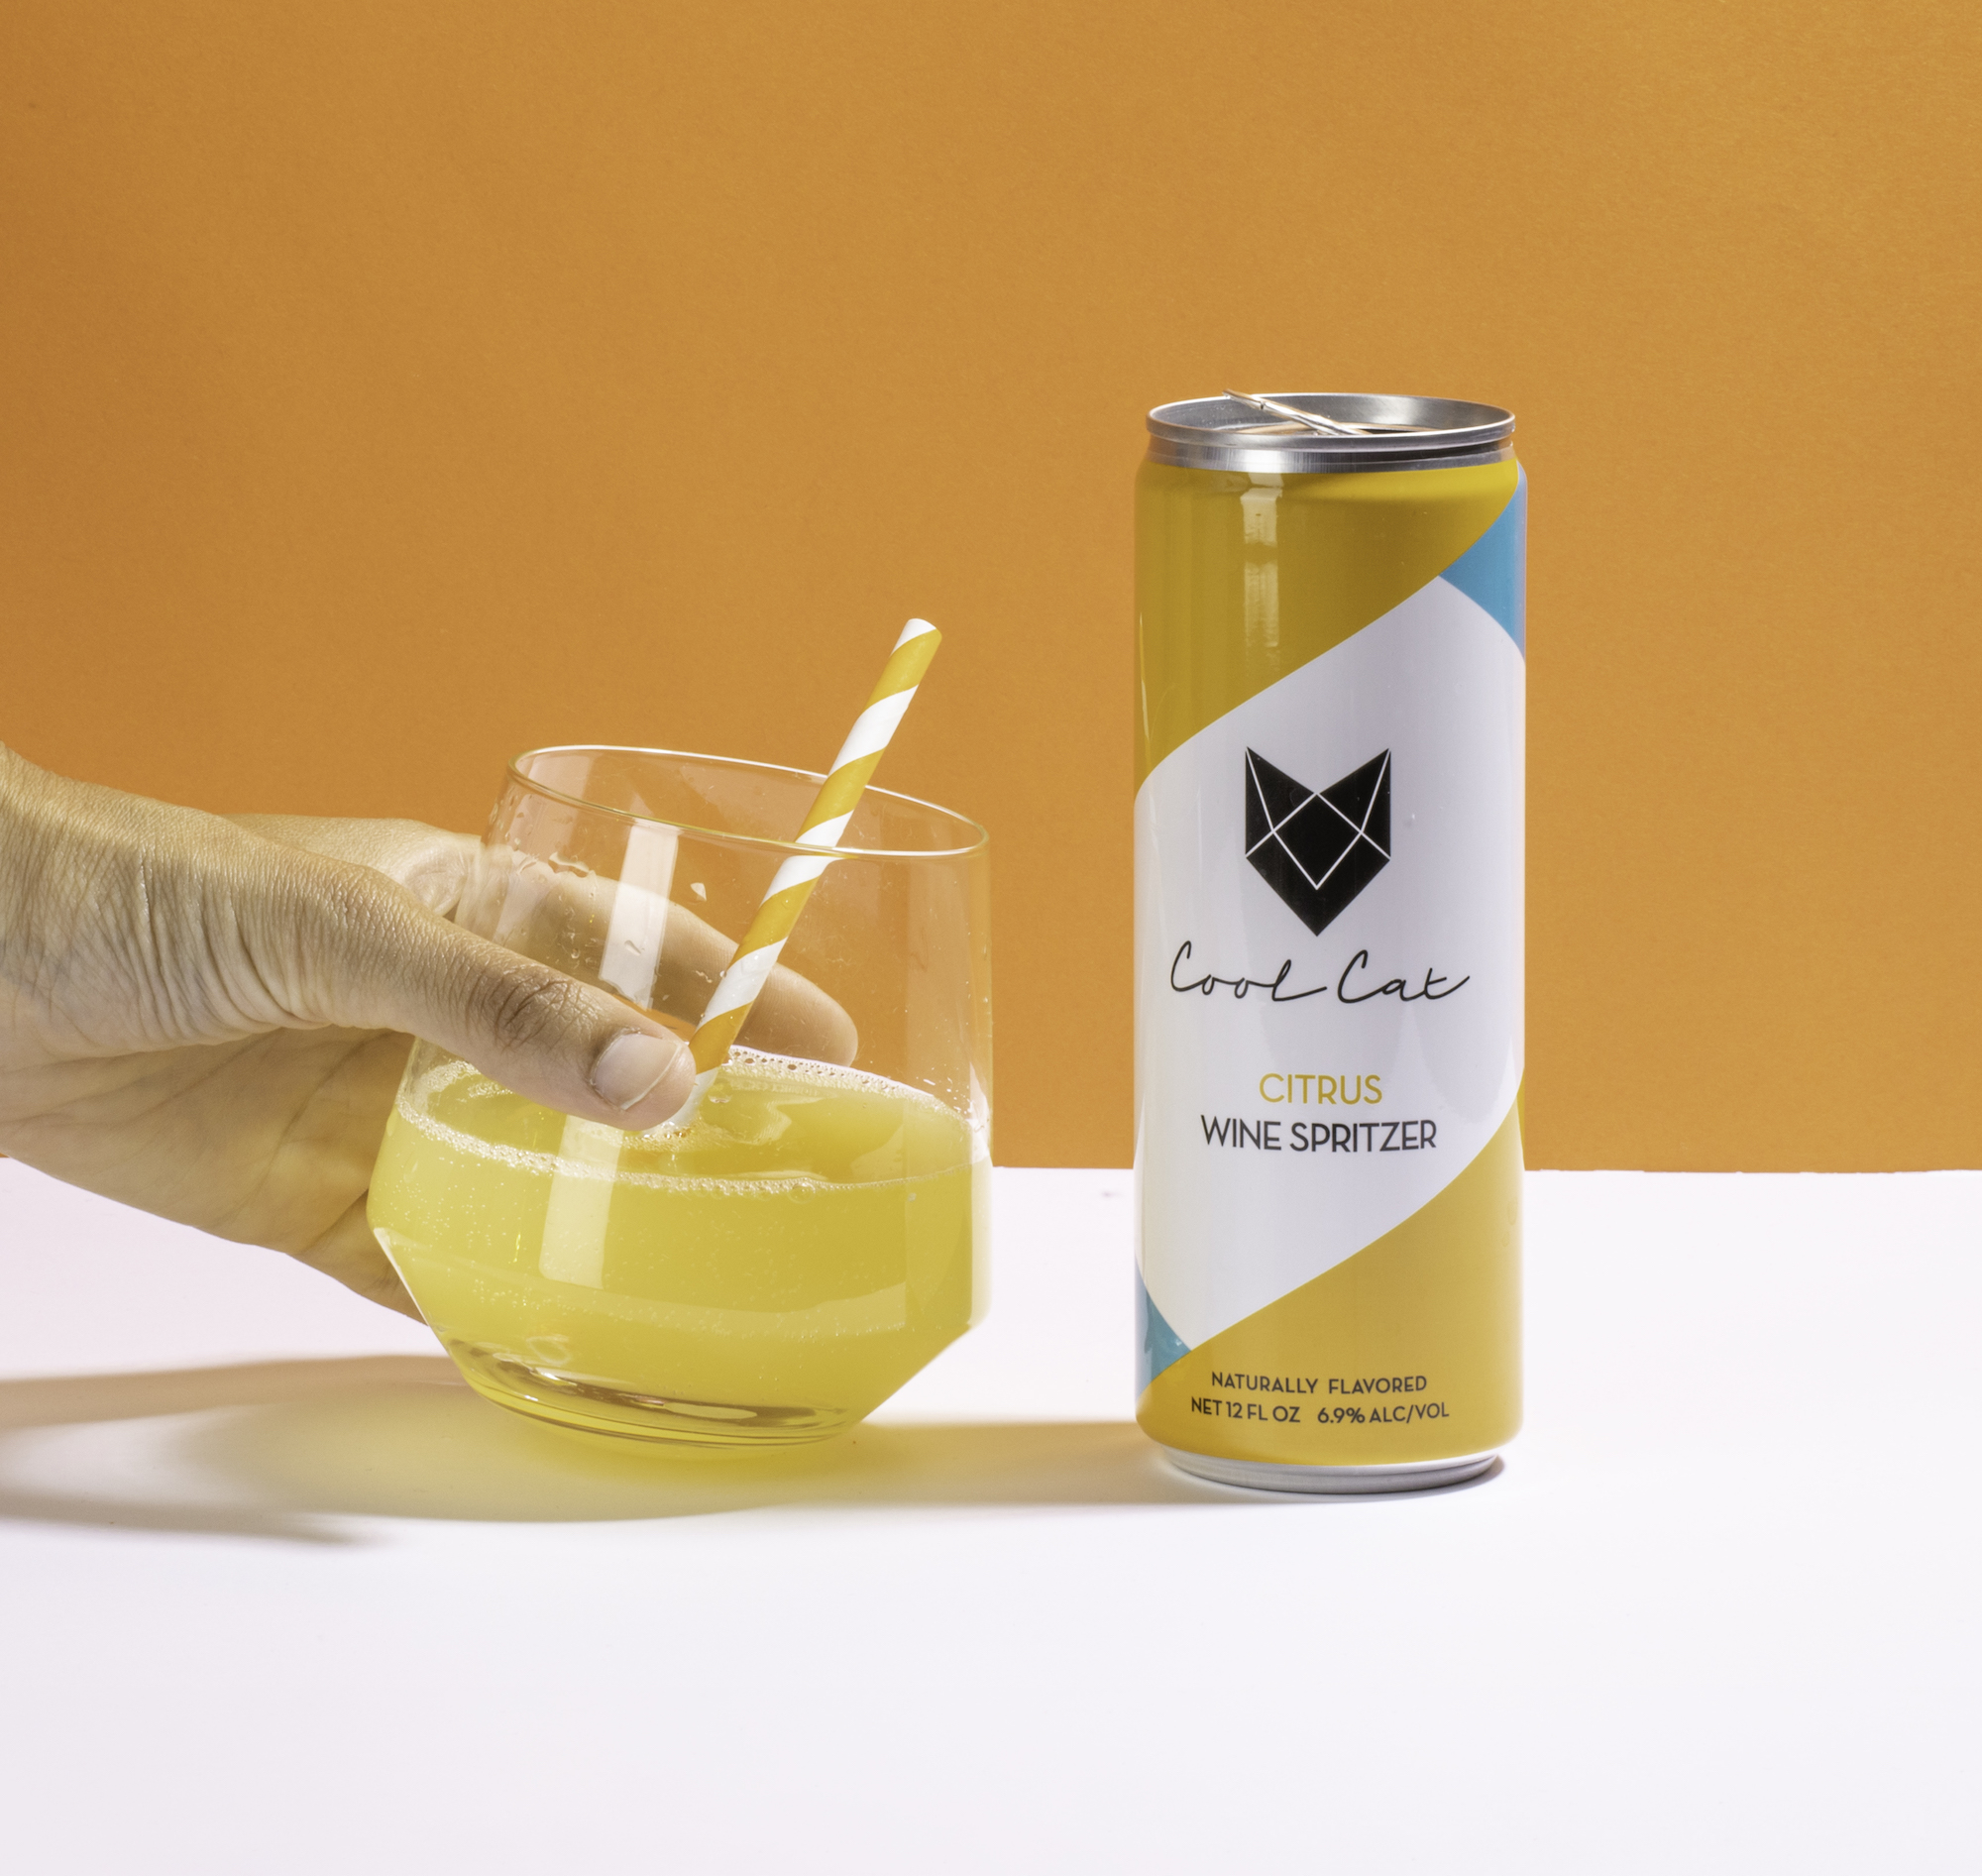 Orange Juice Energy Drink: Boost Your Energy with a Refreshing Twist